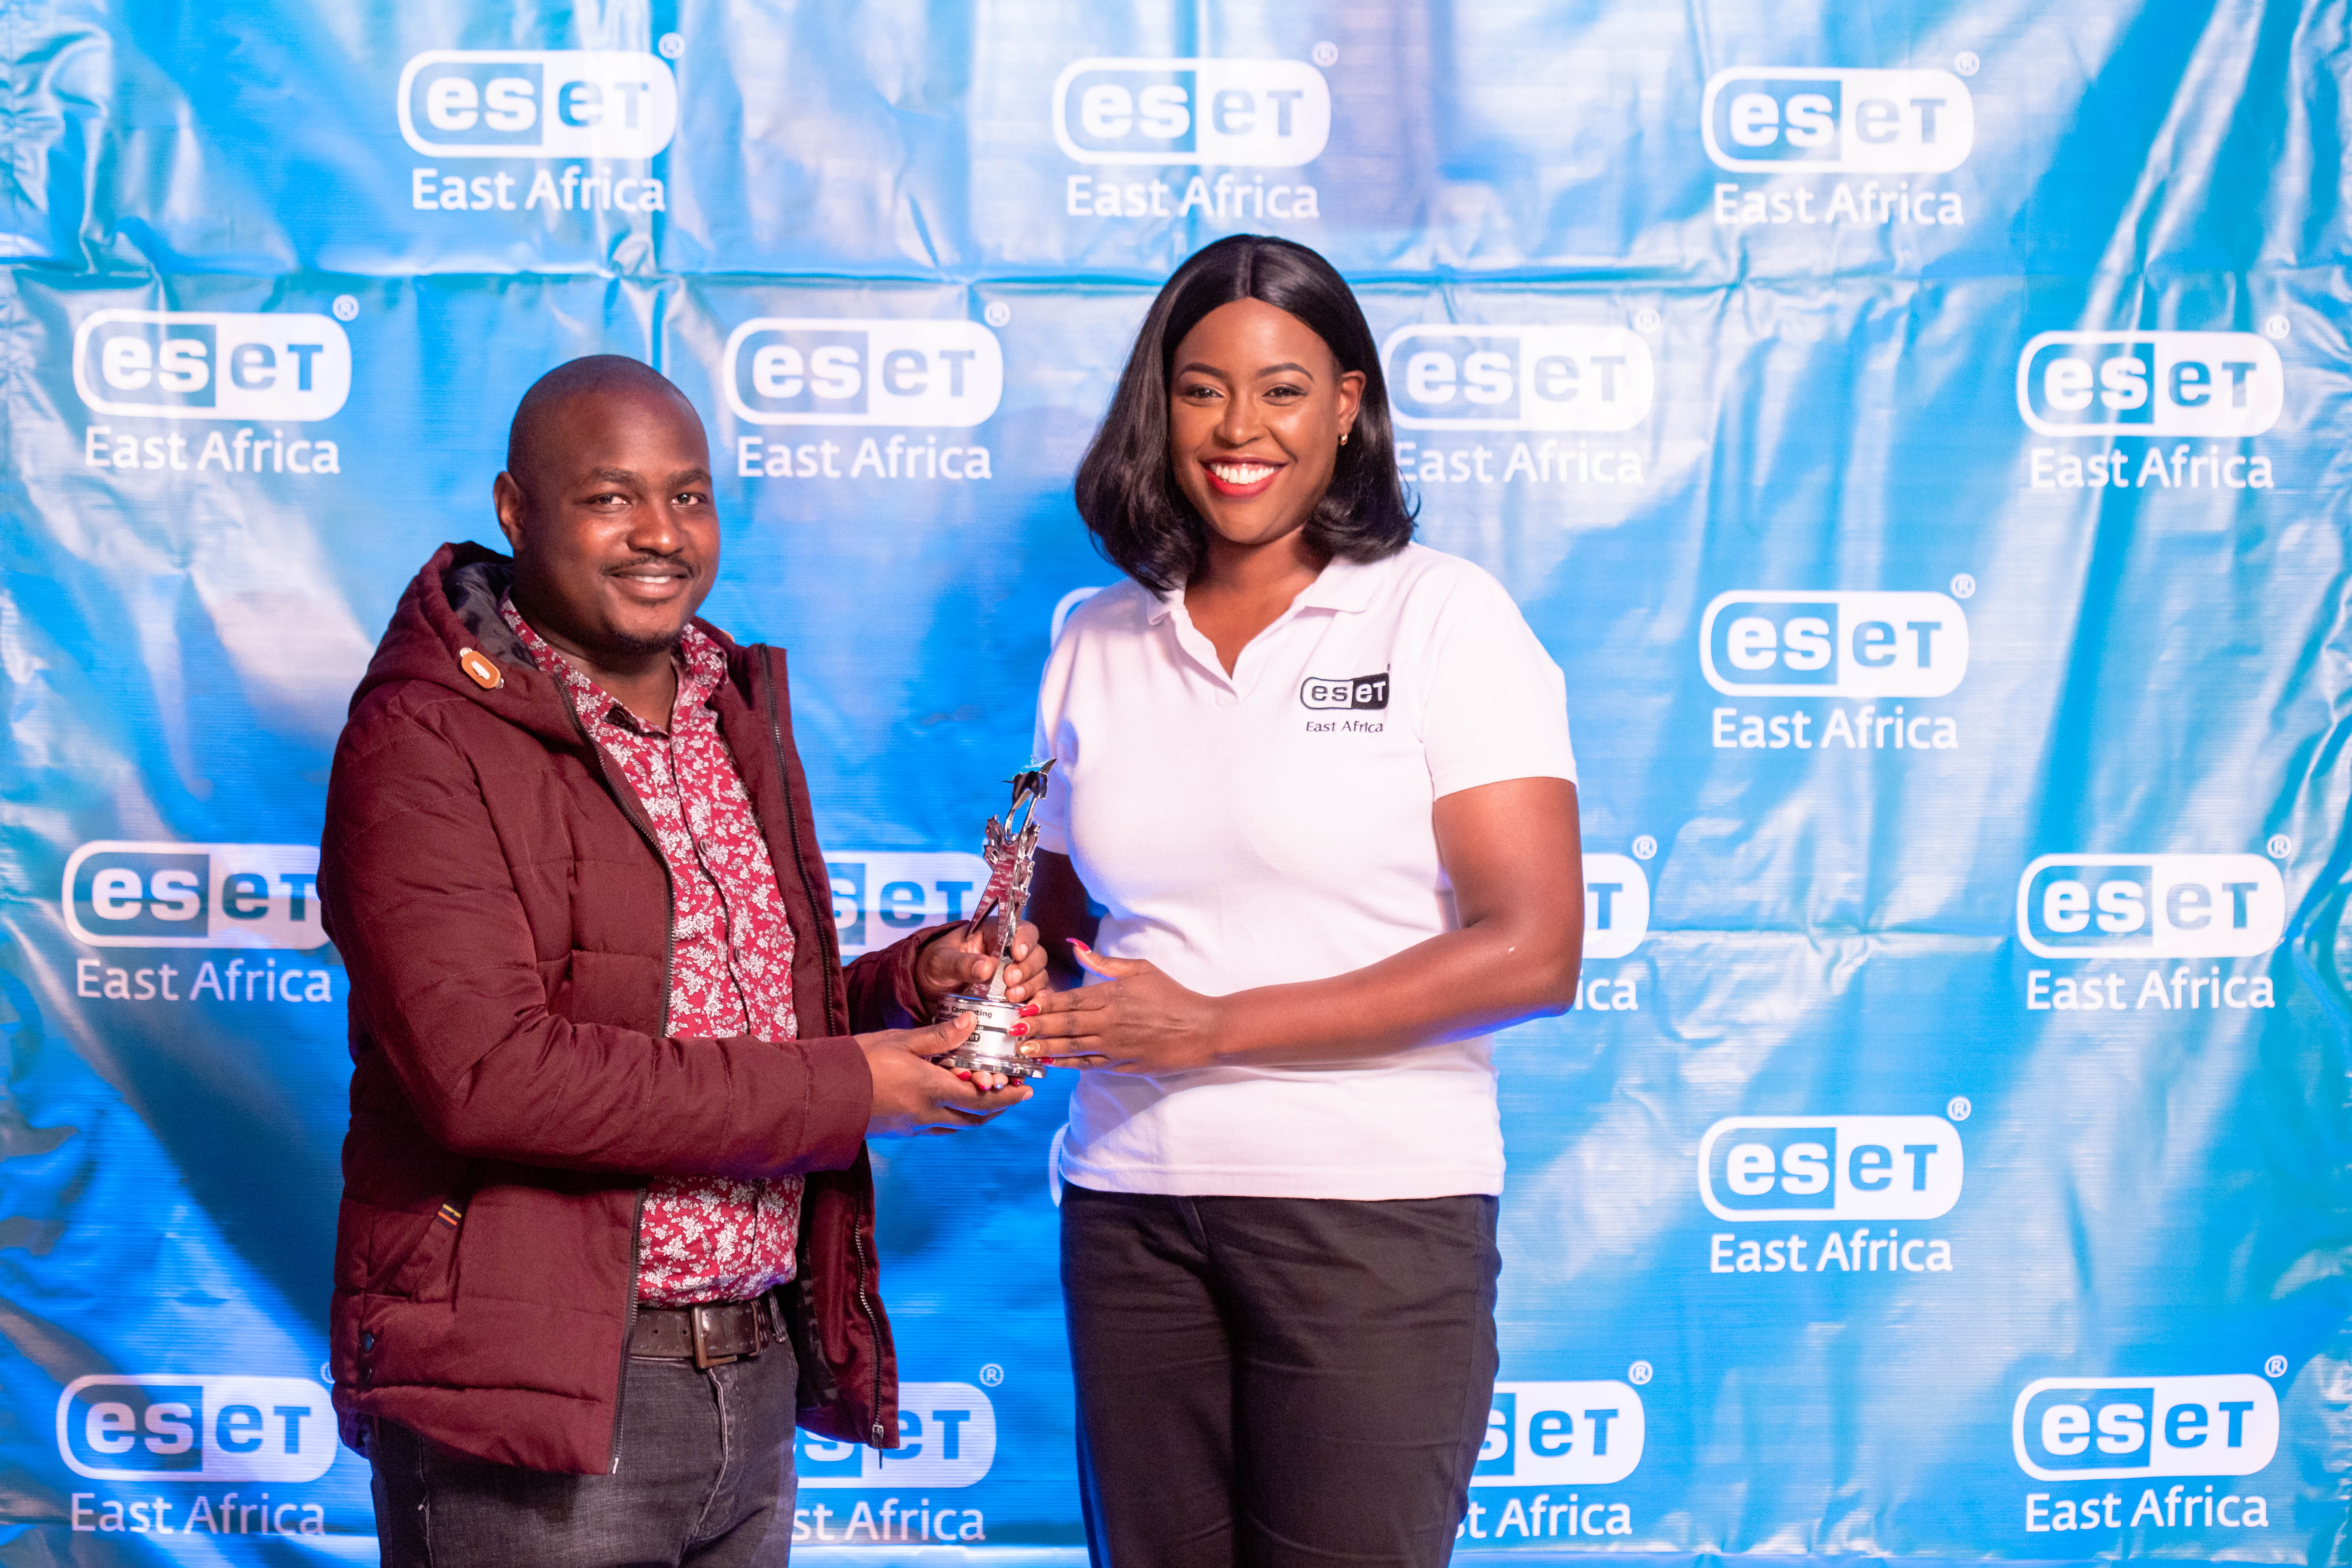 The companies were feted by ESET EA for advanced excellency in online security